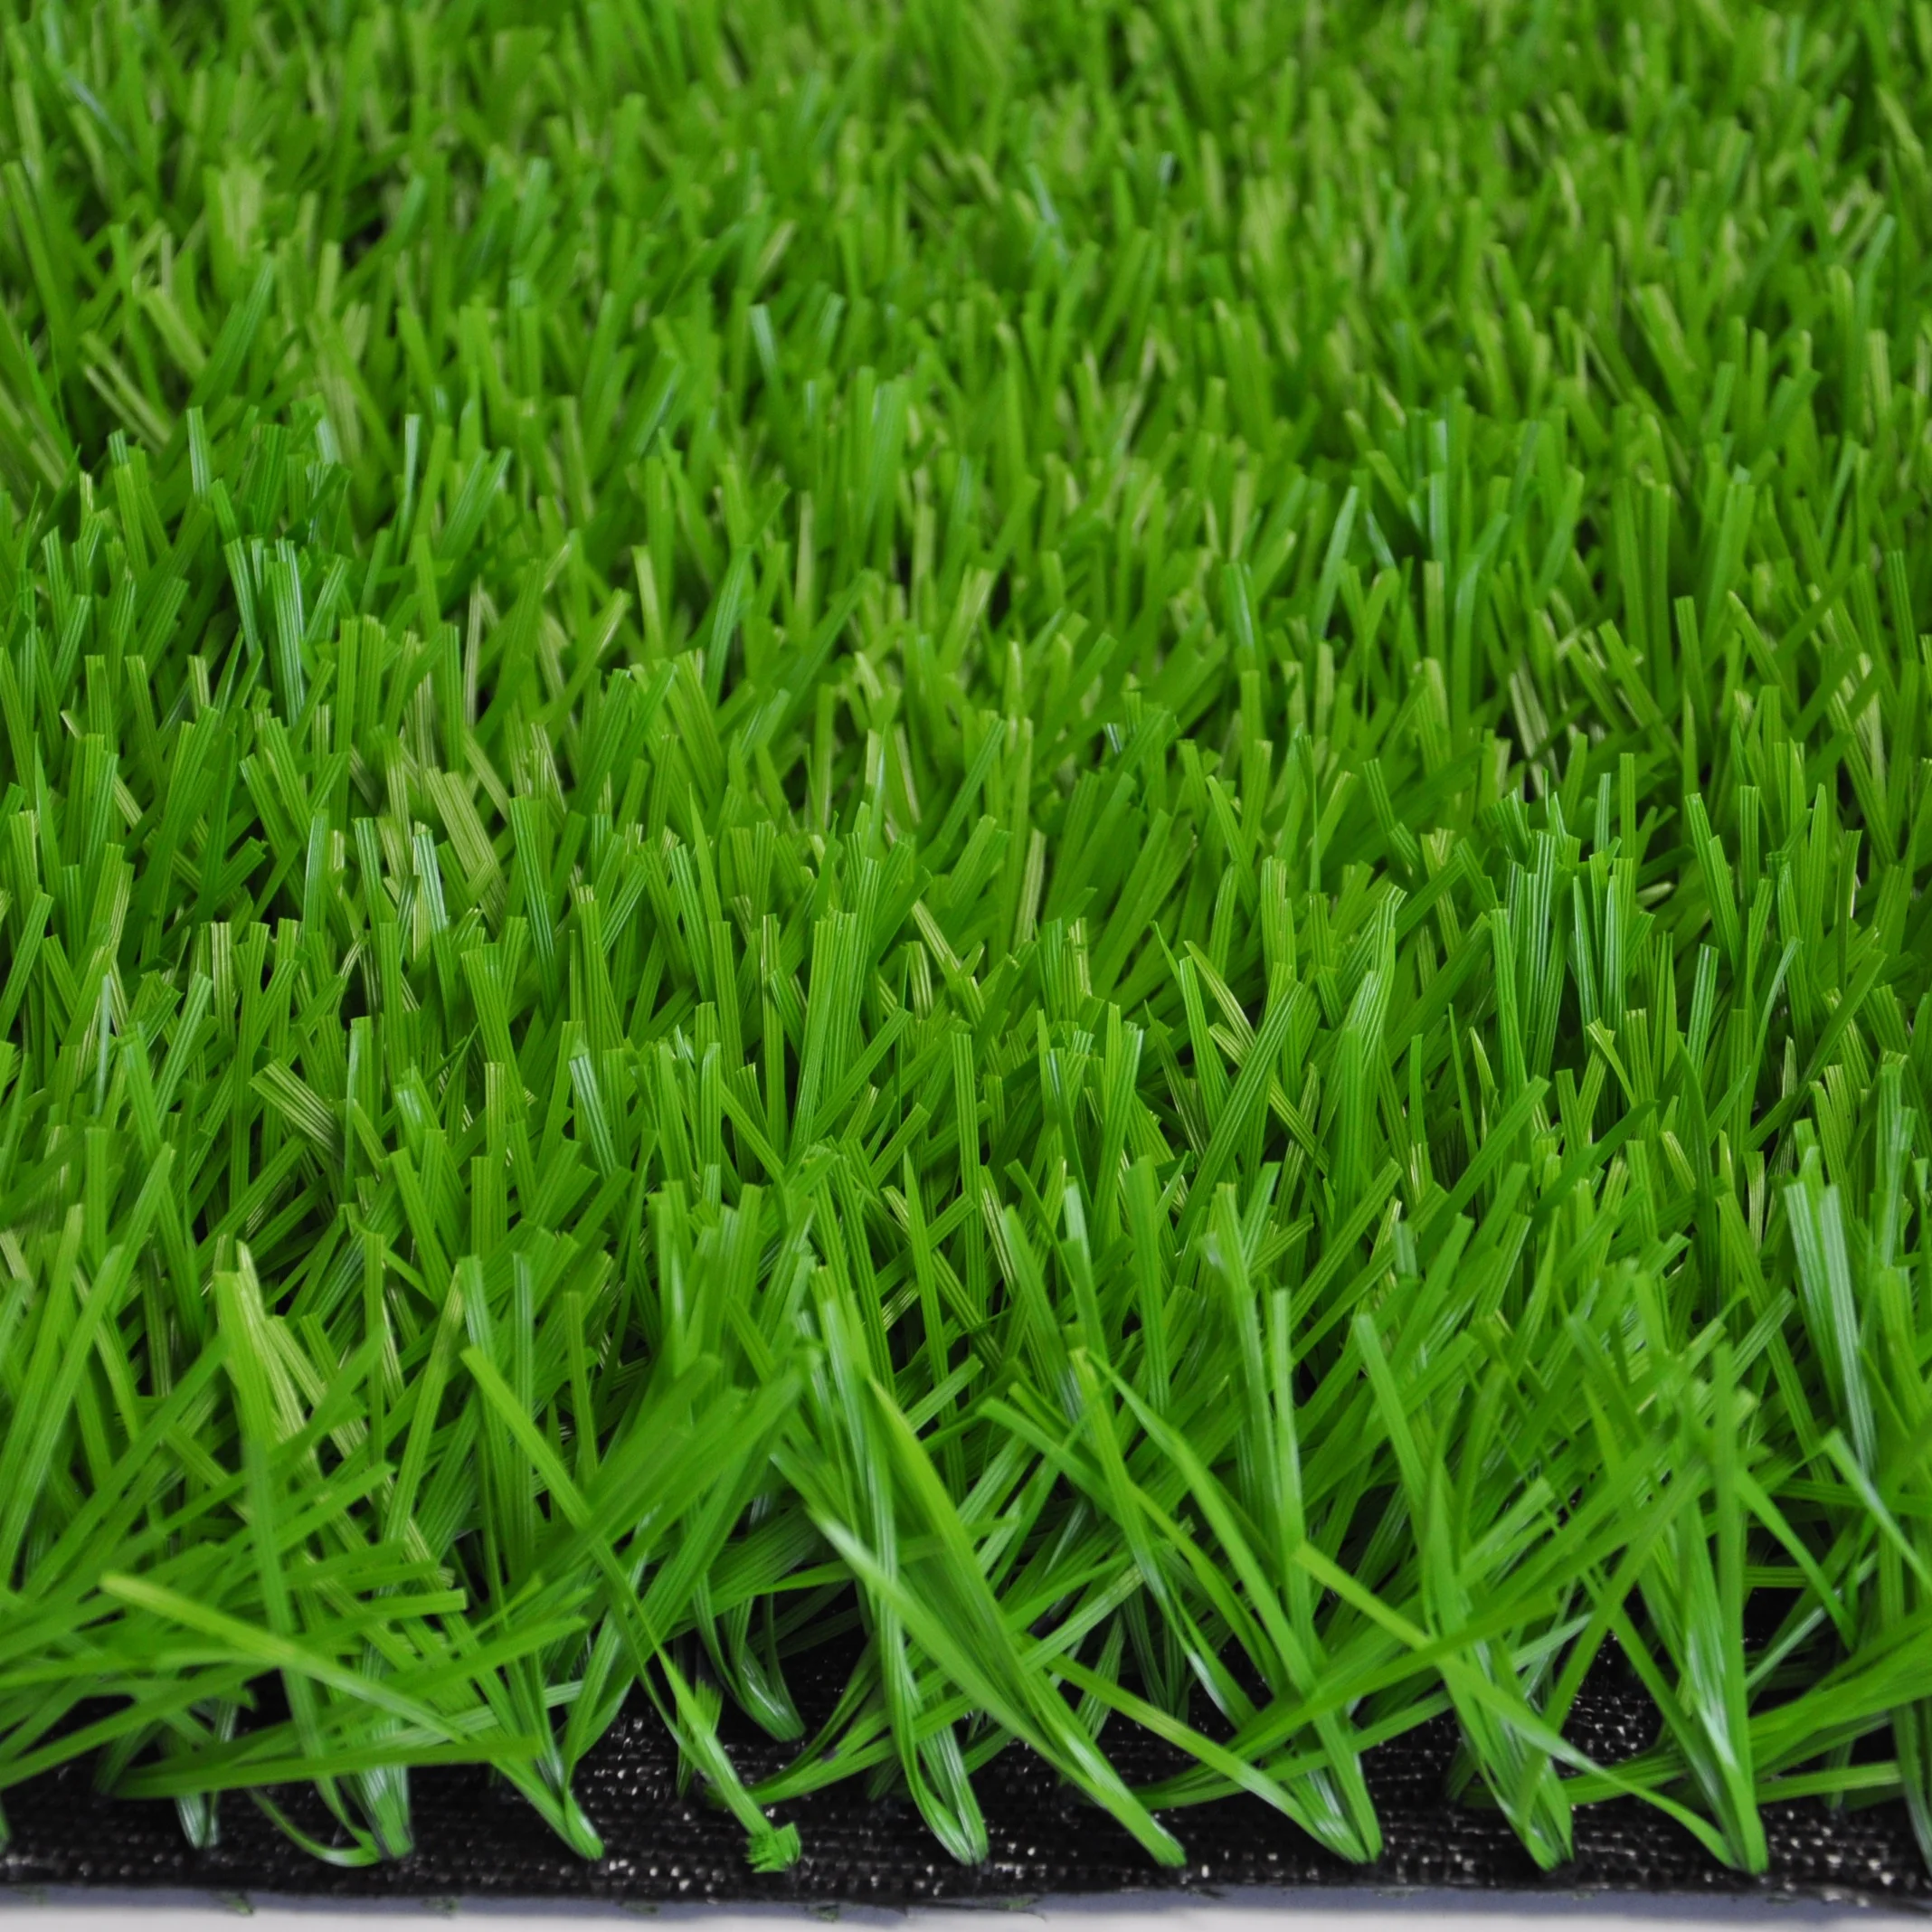 

Football landscape putting green grass synthetic turf artificial grass, Green color